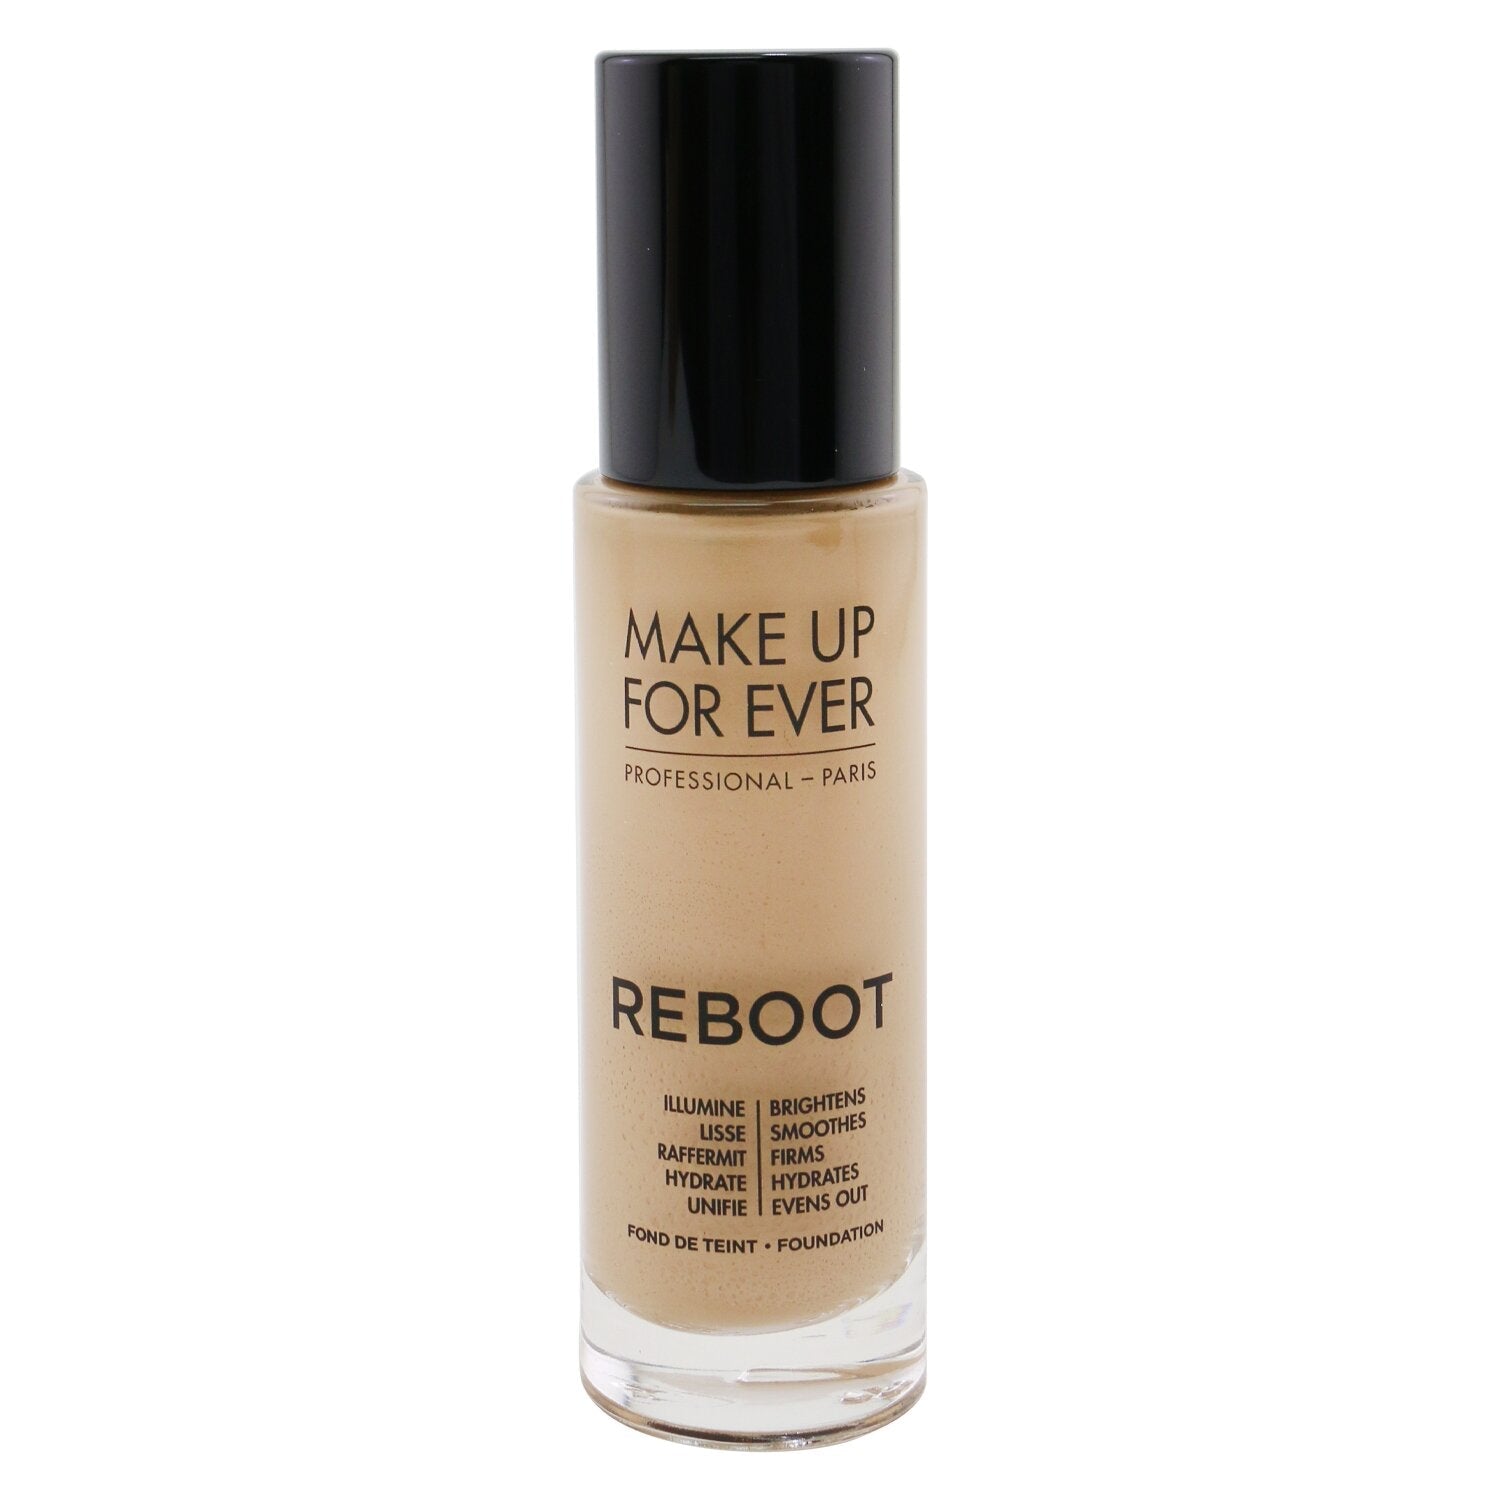 Make Up For Ever Ultra HD Invisible Cover Foundation, Y215 - 1.01 oz bottle